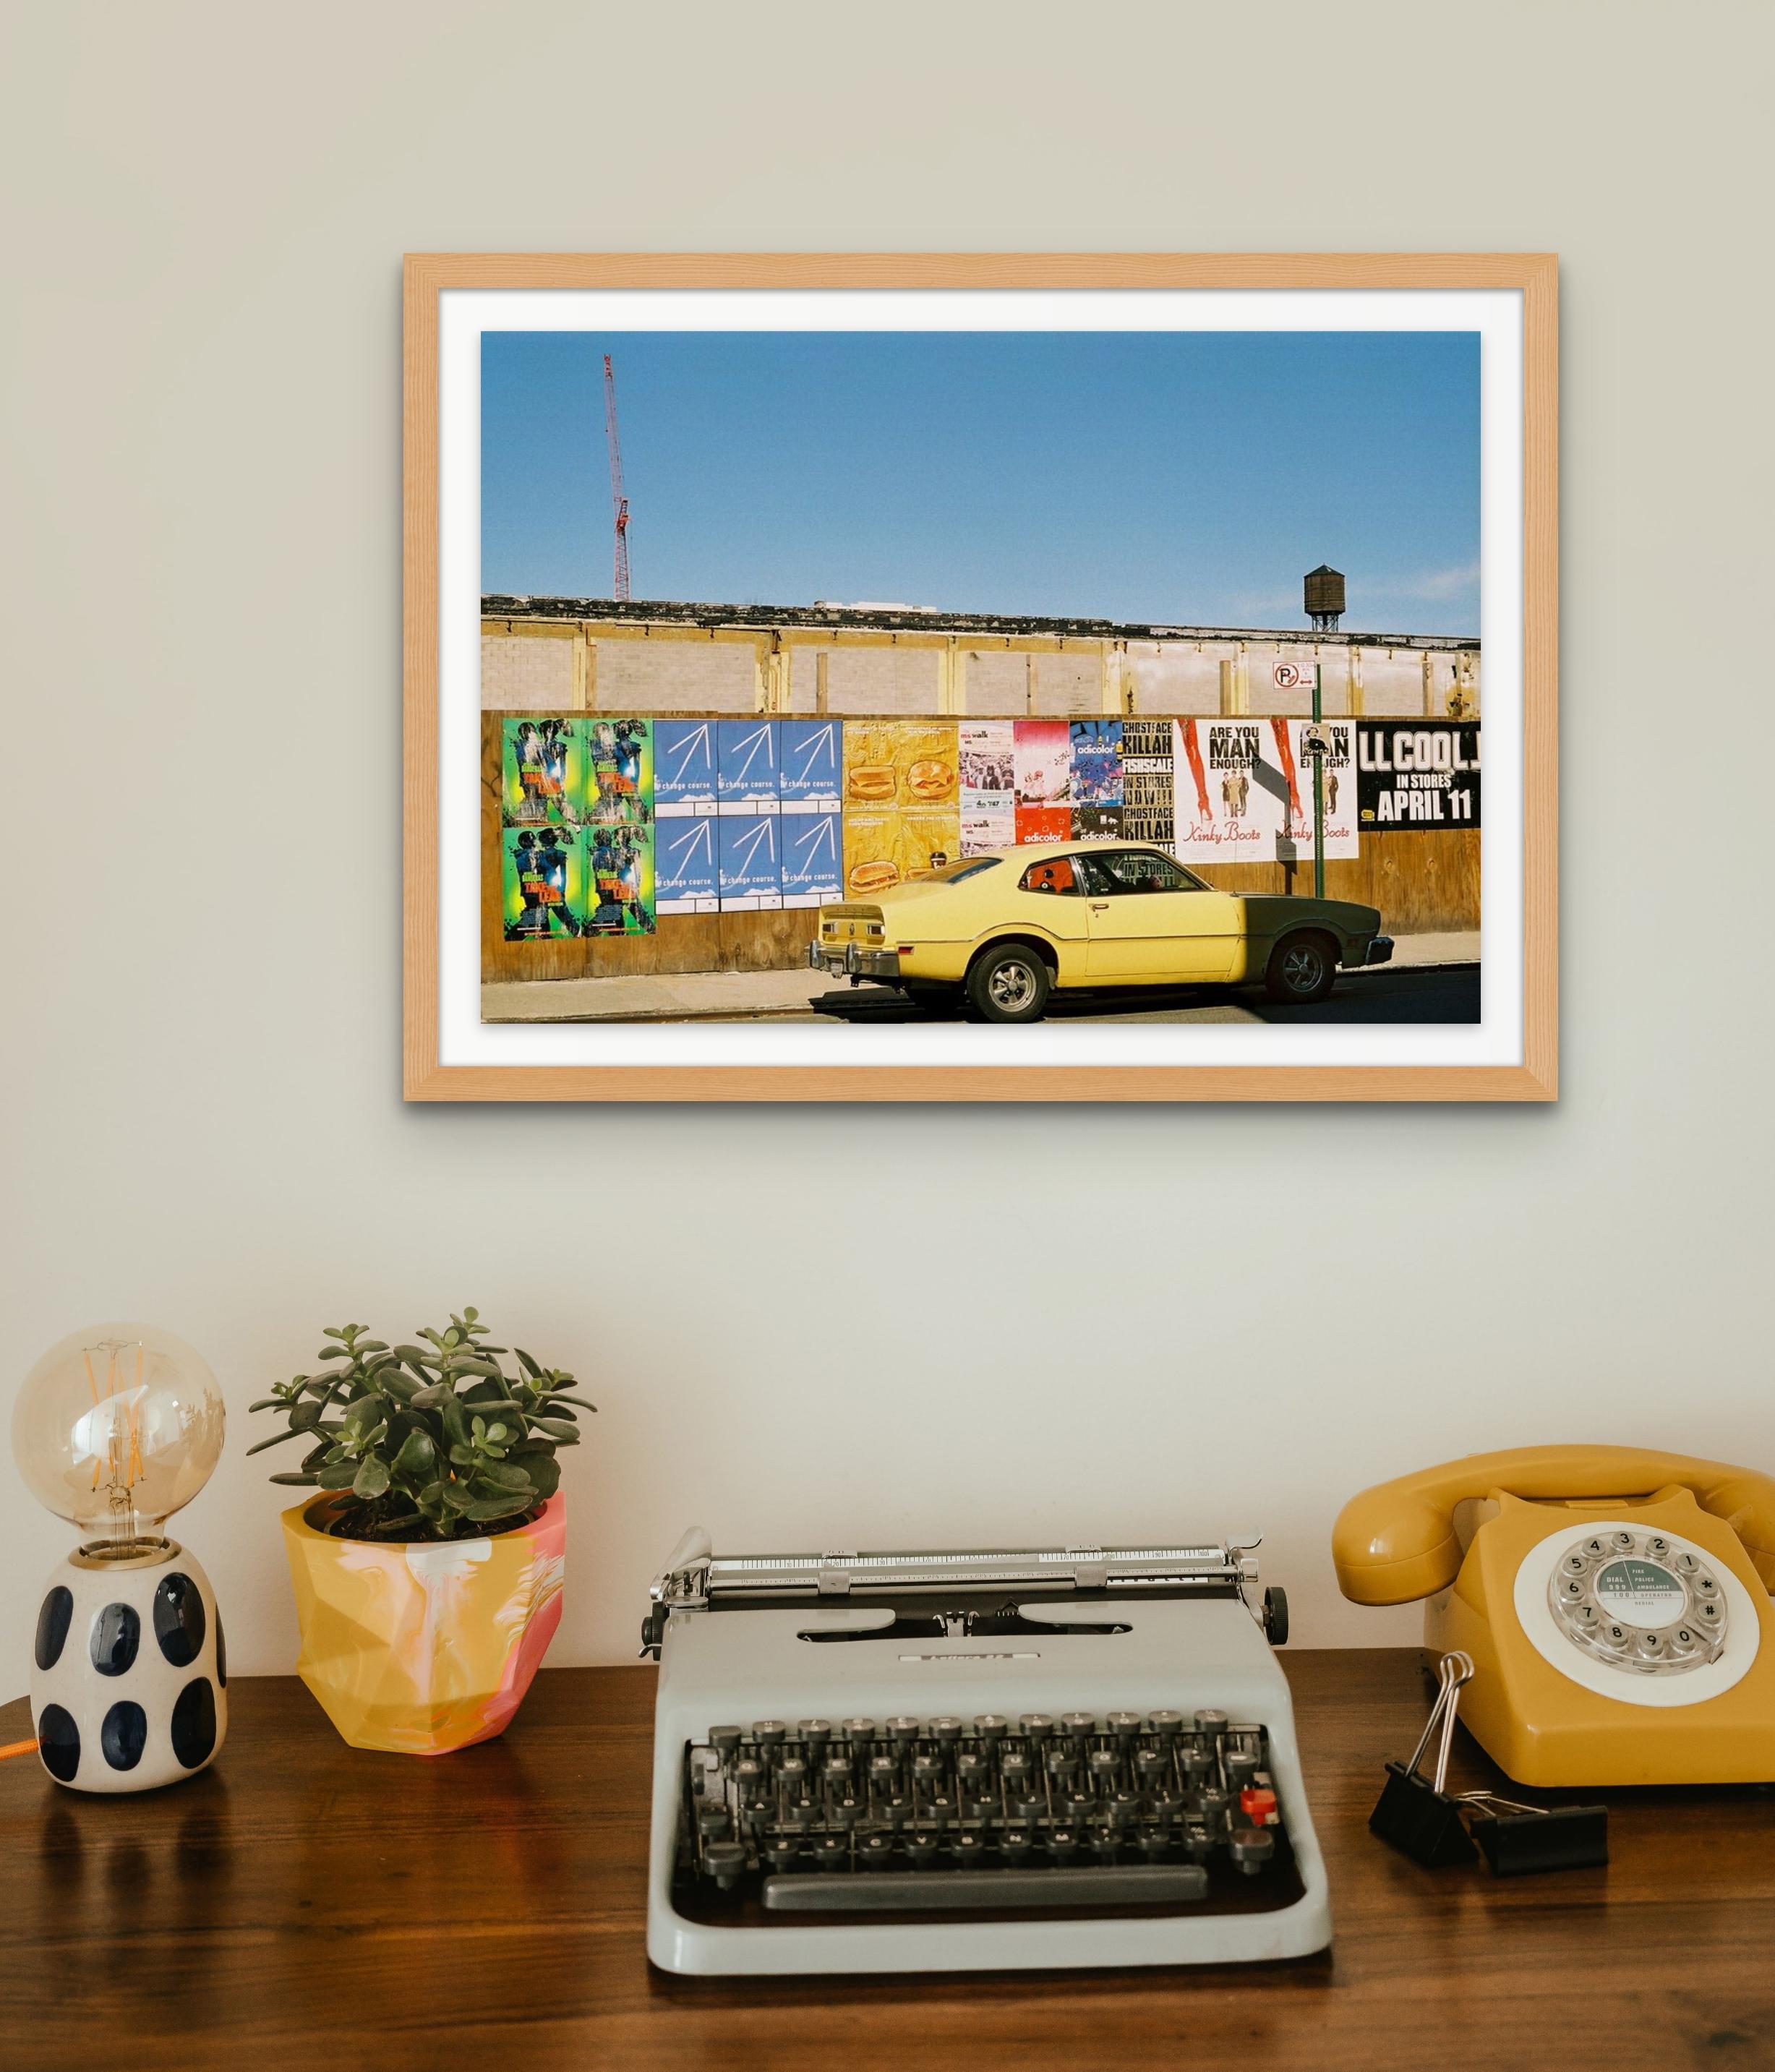 Williamsburg 8- Colourful Preppy Vintage Photographic Print on Paper - Gray Color Photograph by Susan Daboll